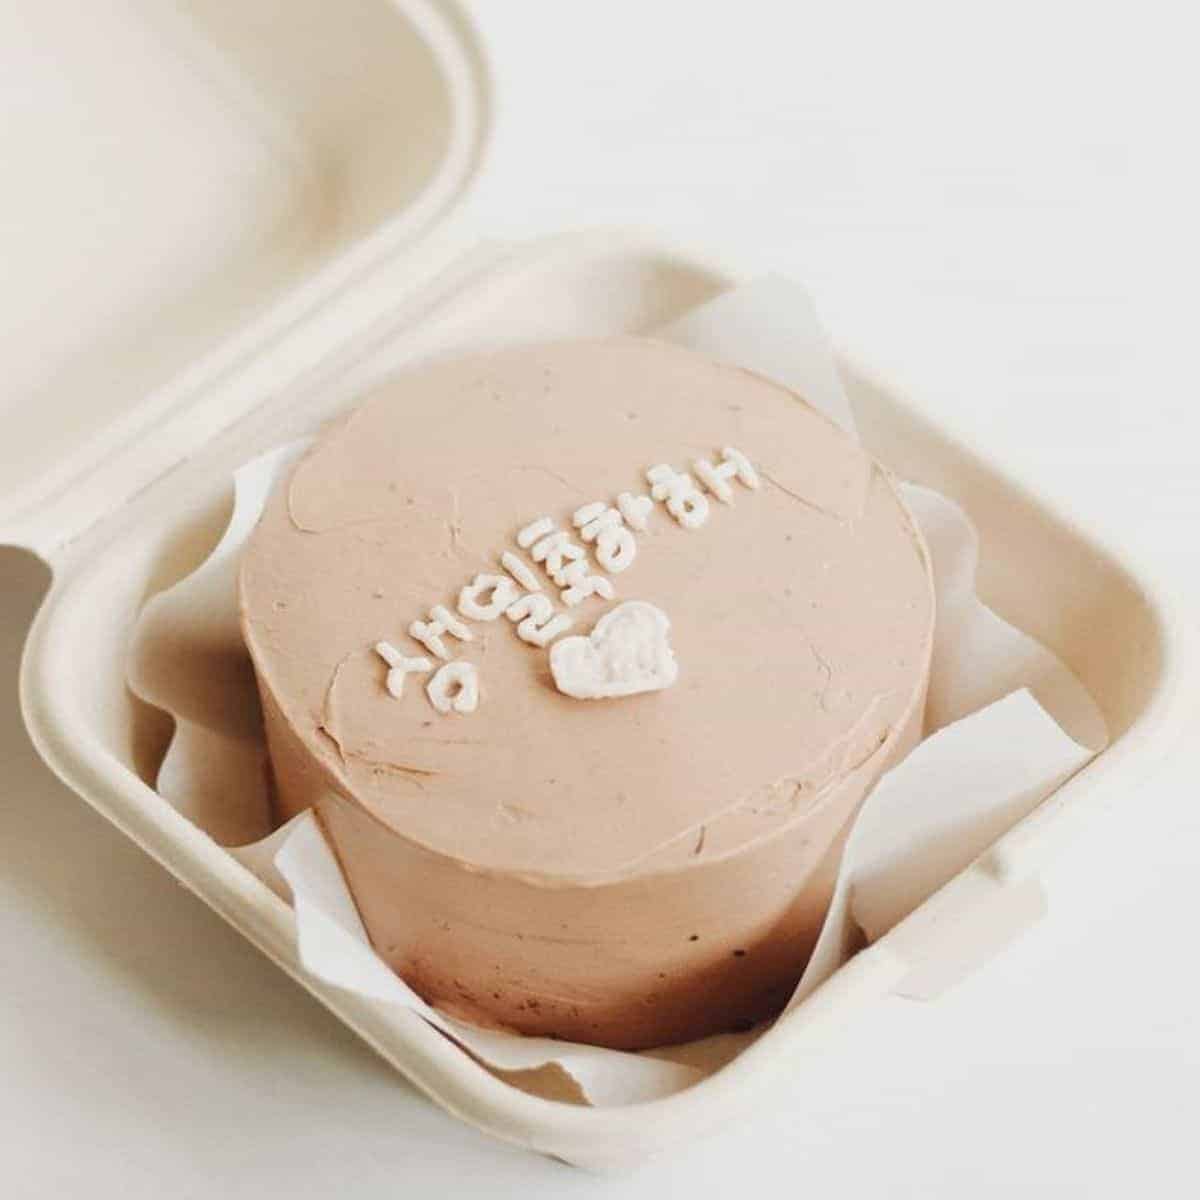 Get Homemade Korean Lunchbox Cakes From These Kochi Bakers - PinkLungi